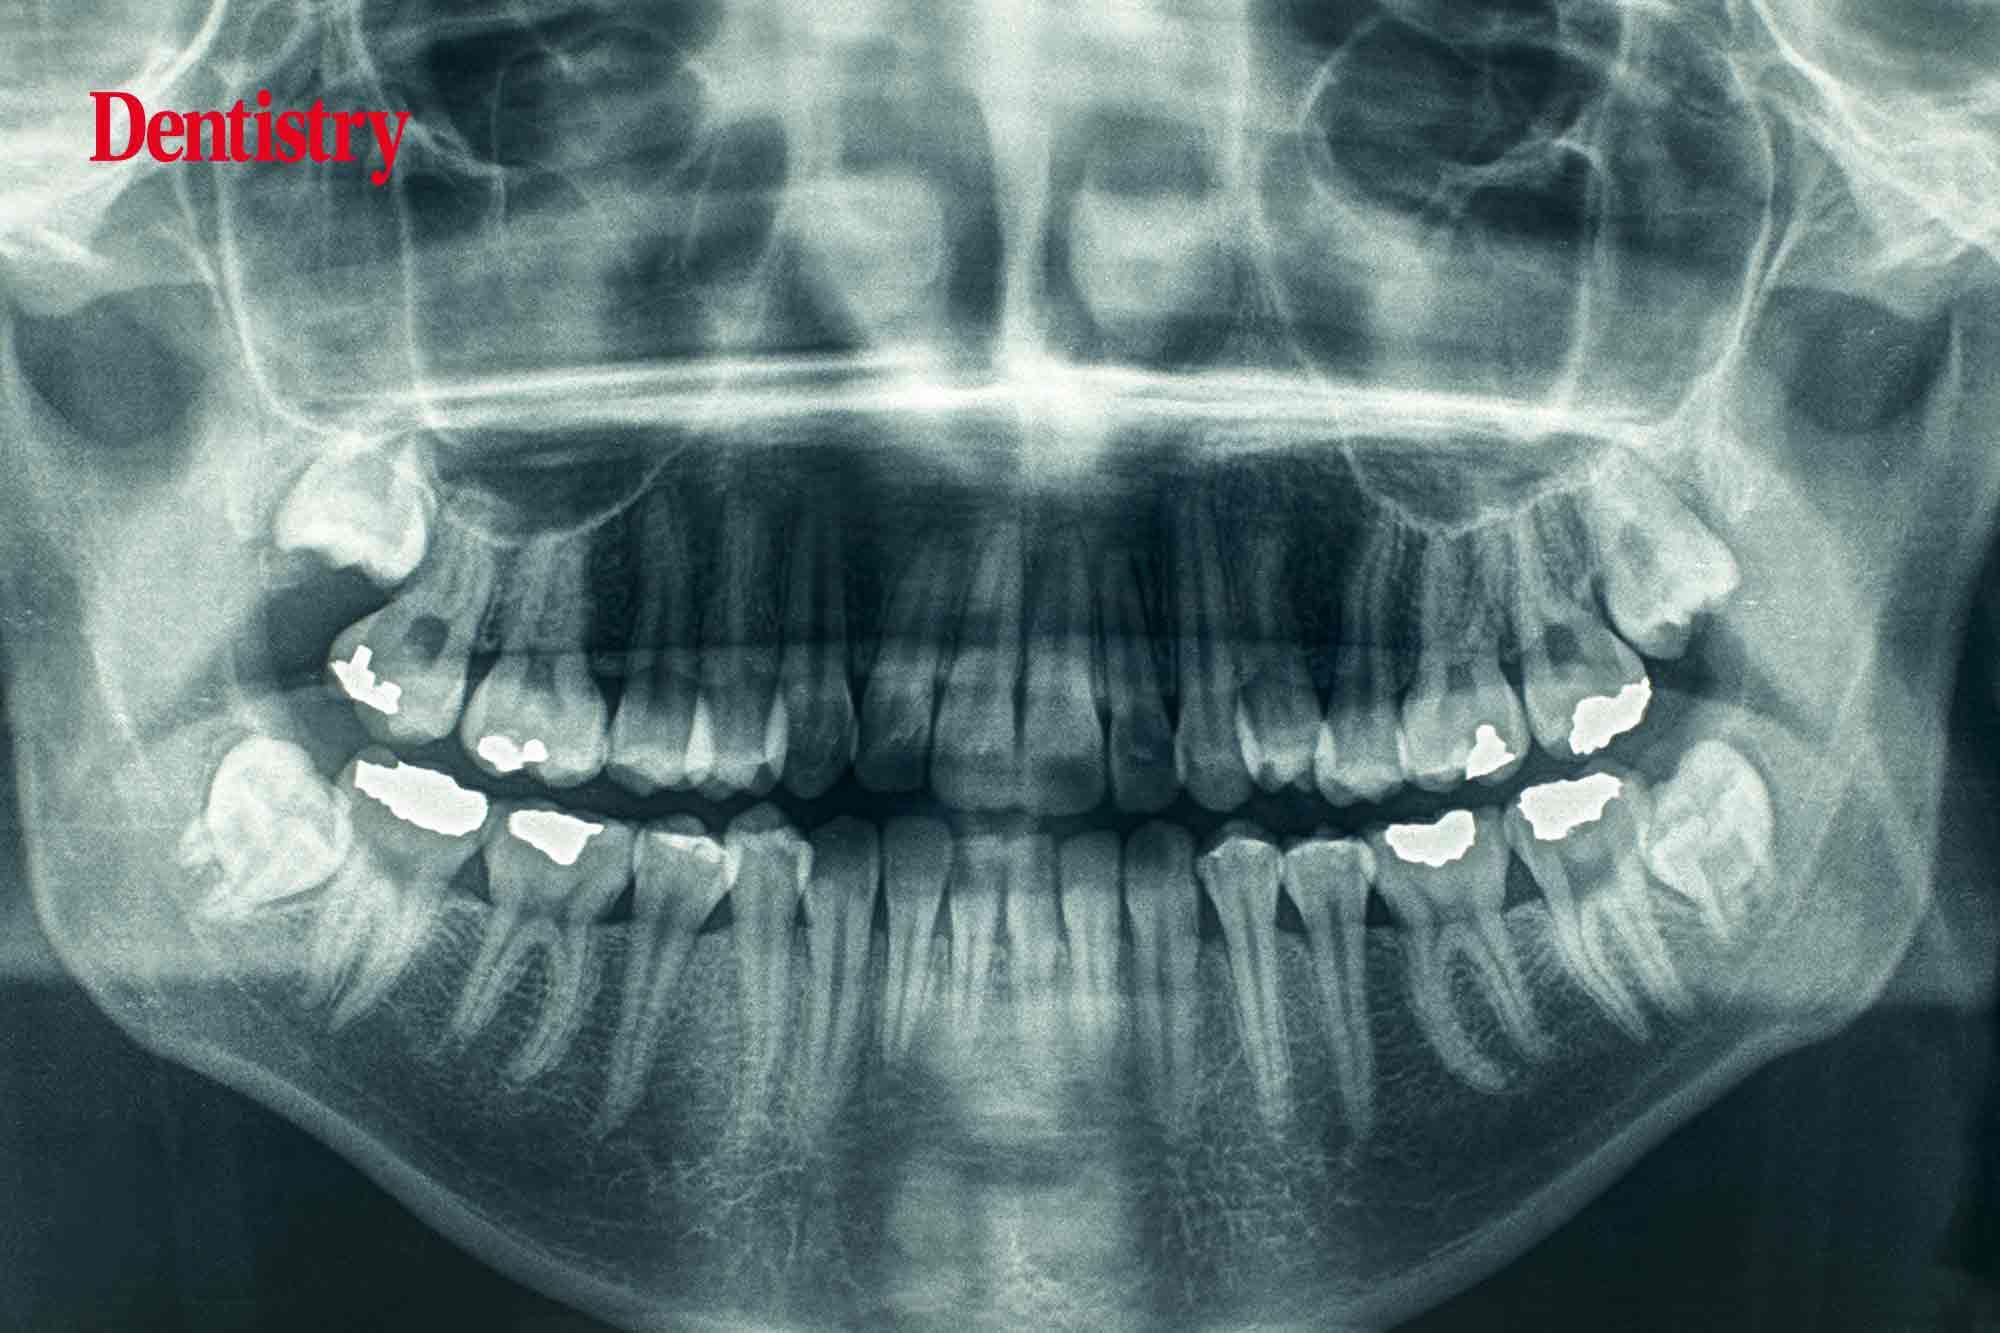 Lords argue against use of dental x rays on asylum seekers